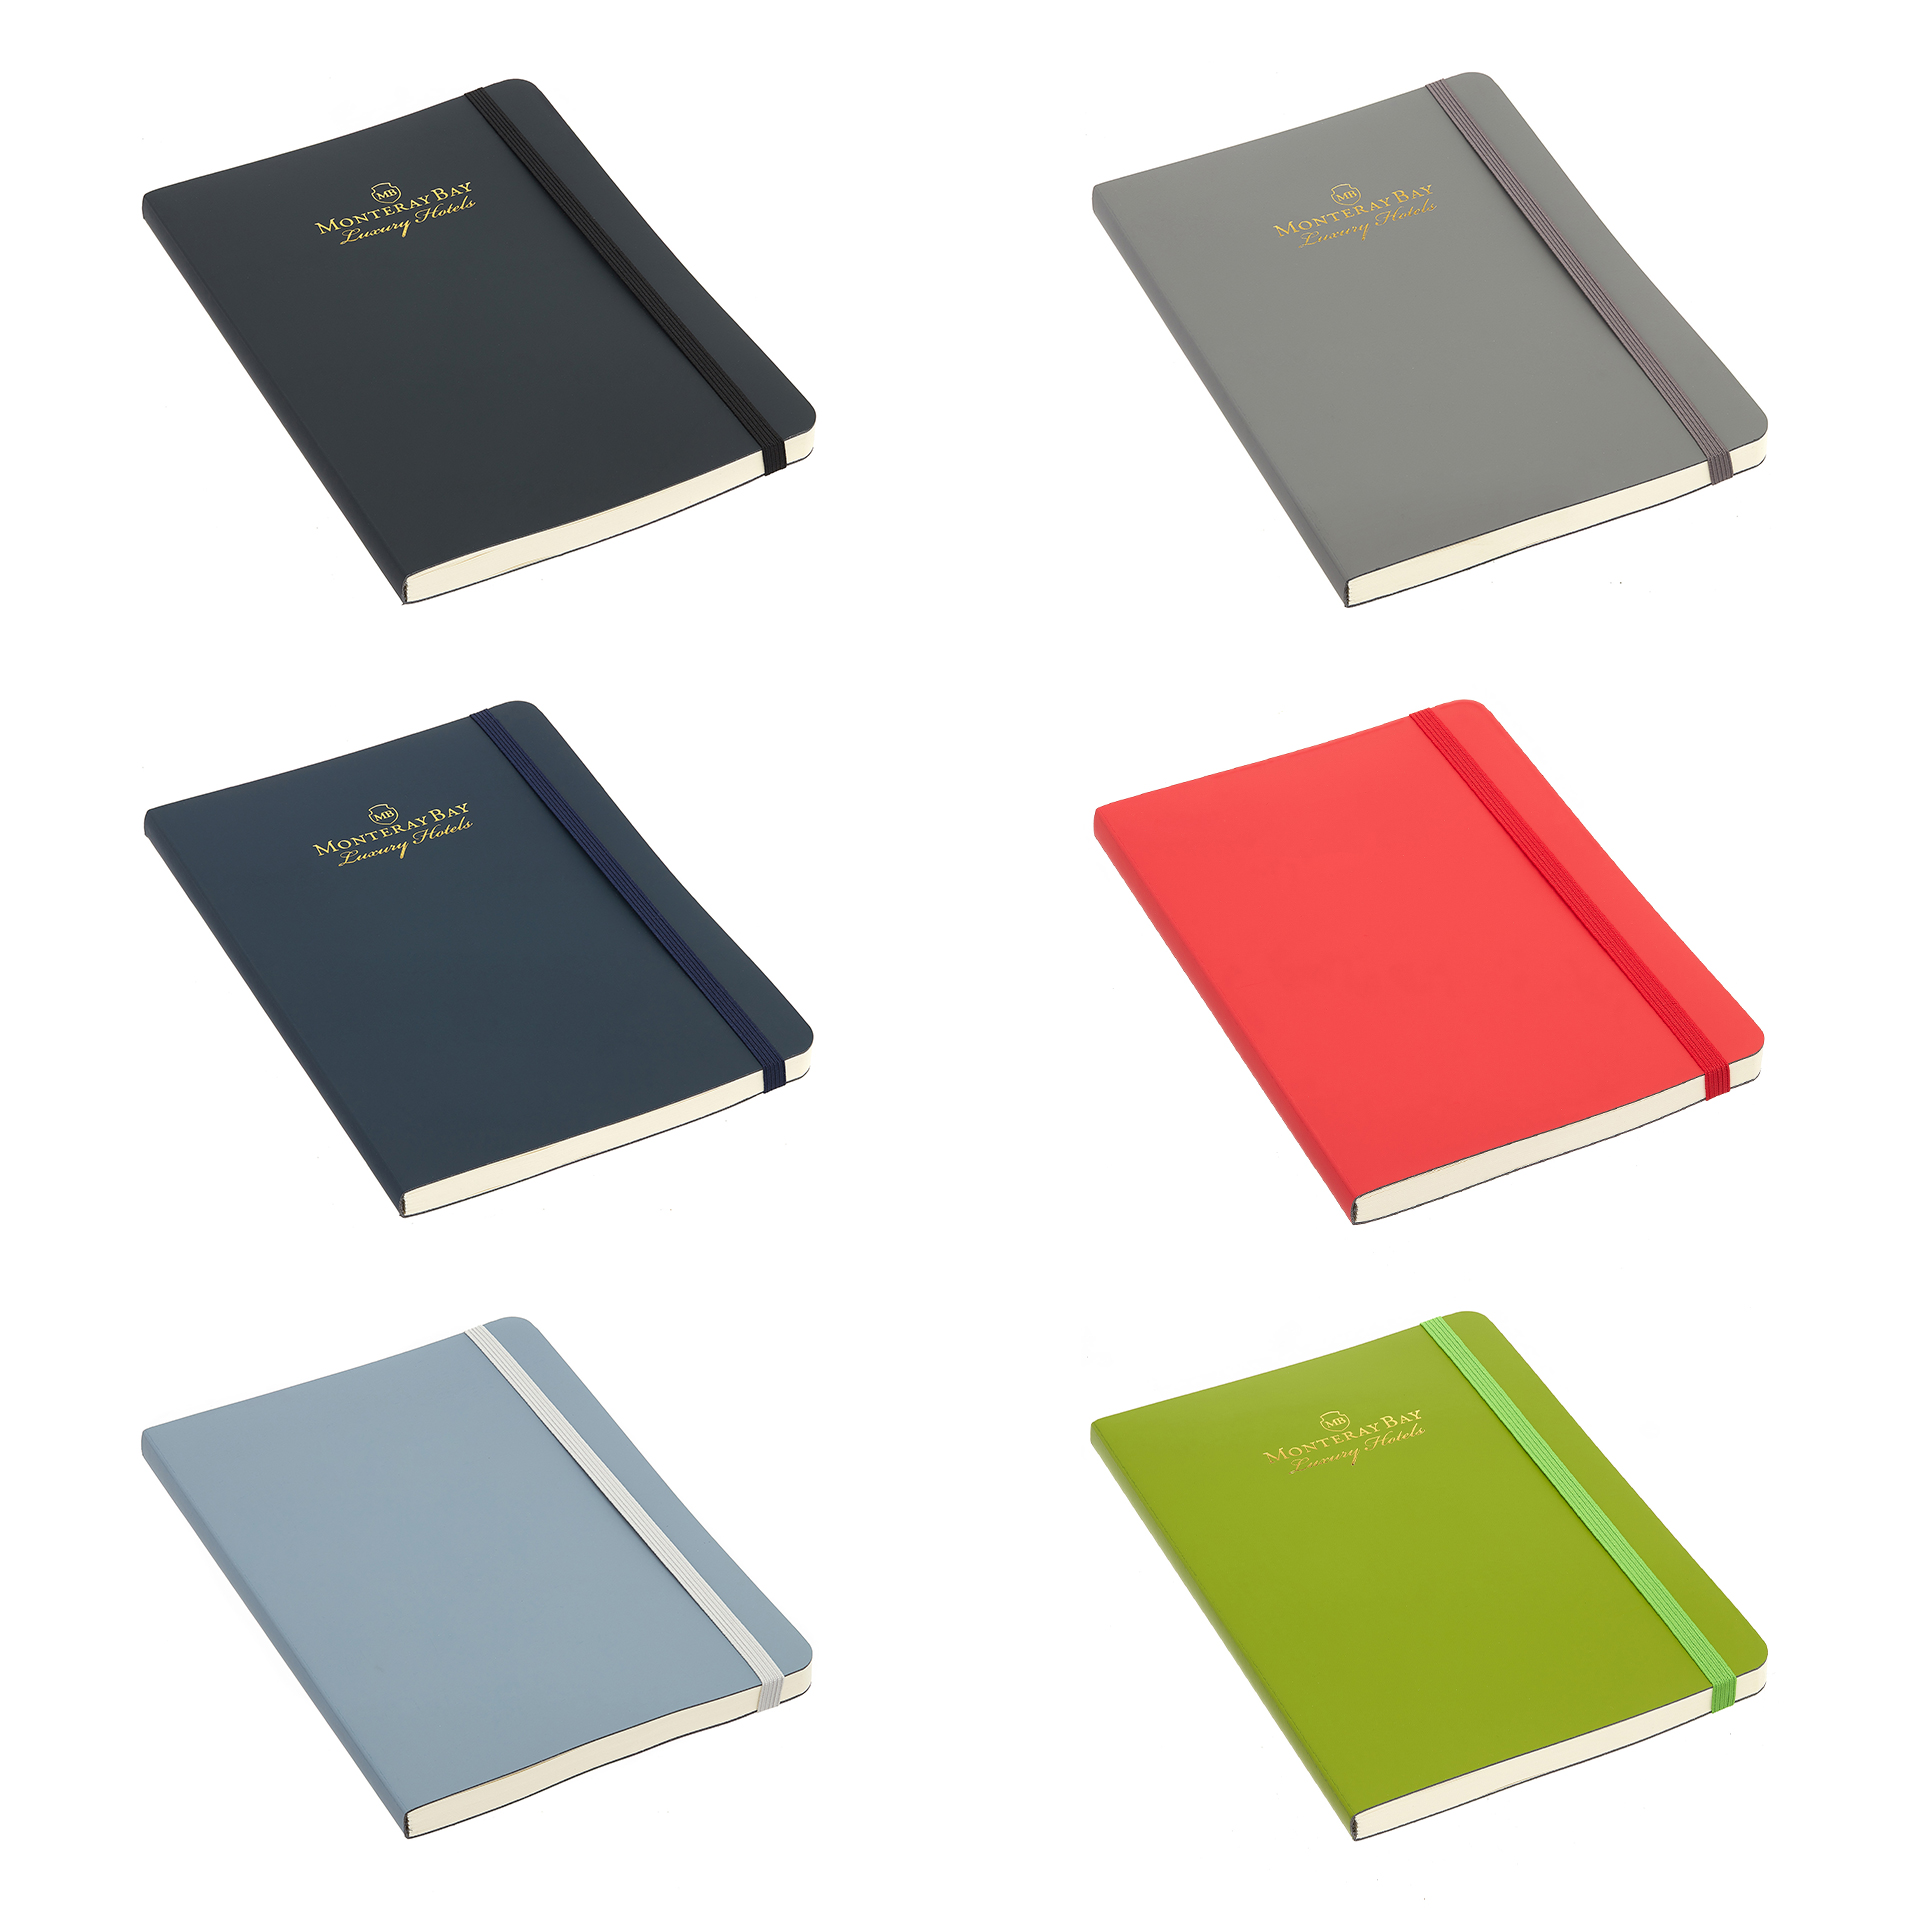 Contemporary notebook with covers made from recycled leather fibres which are Oekotex certified. Made in the EU, this notebook has a great feel is and is beautifully finished. Comes as standard with 192 (96 sheets) pages ivoryÊsustainable LINED paper. AvailableÊin 6 stylish colours with elastic closures as shown.